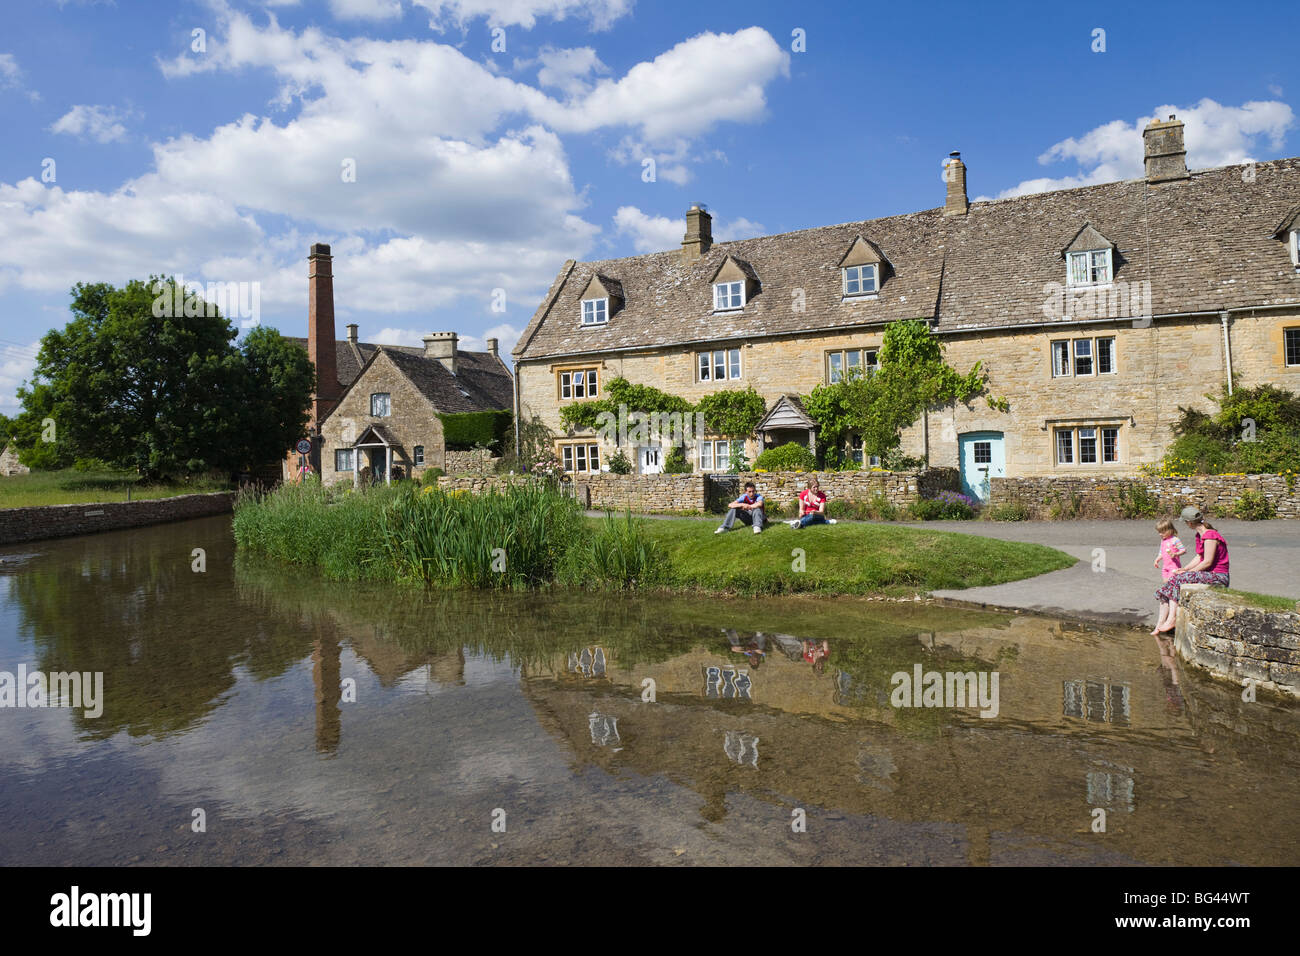 England, Gloustershire, Cotswolds, obere Schlachtung Stockfoto